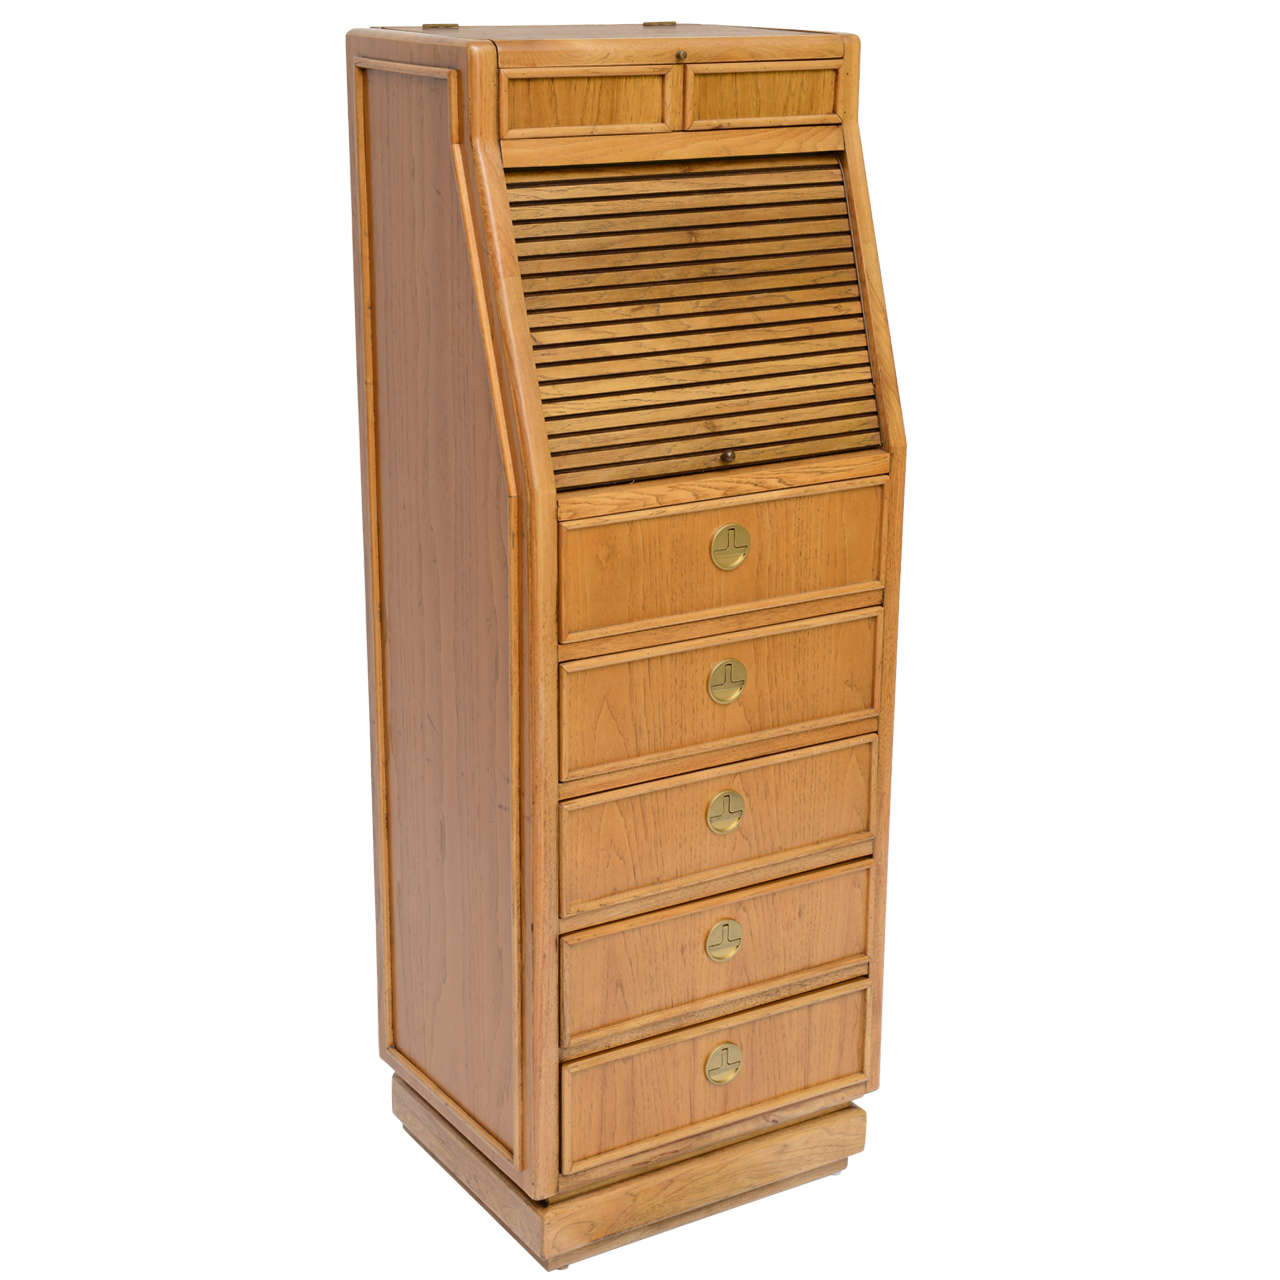 Sold Campaign Style Tall Slender Dresser Valet By American Of